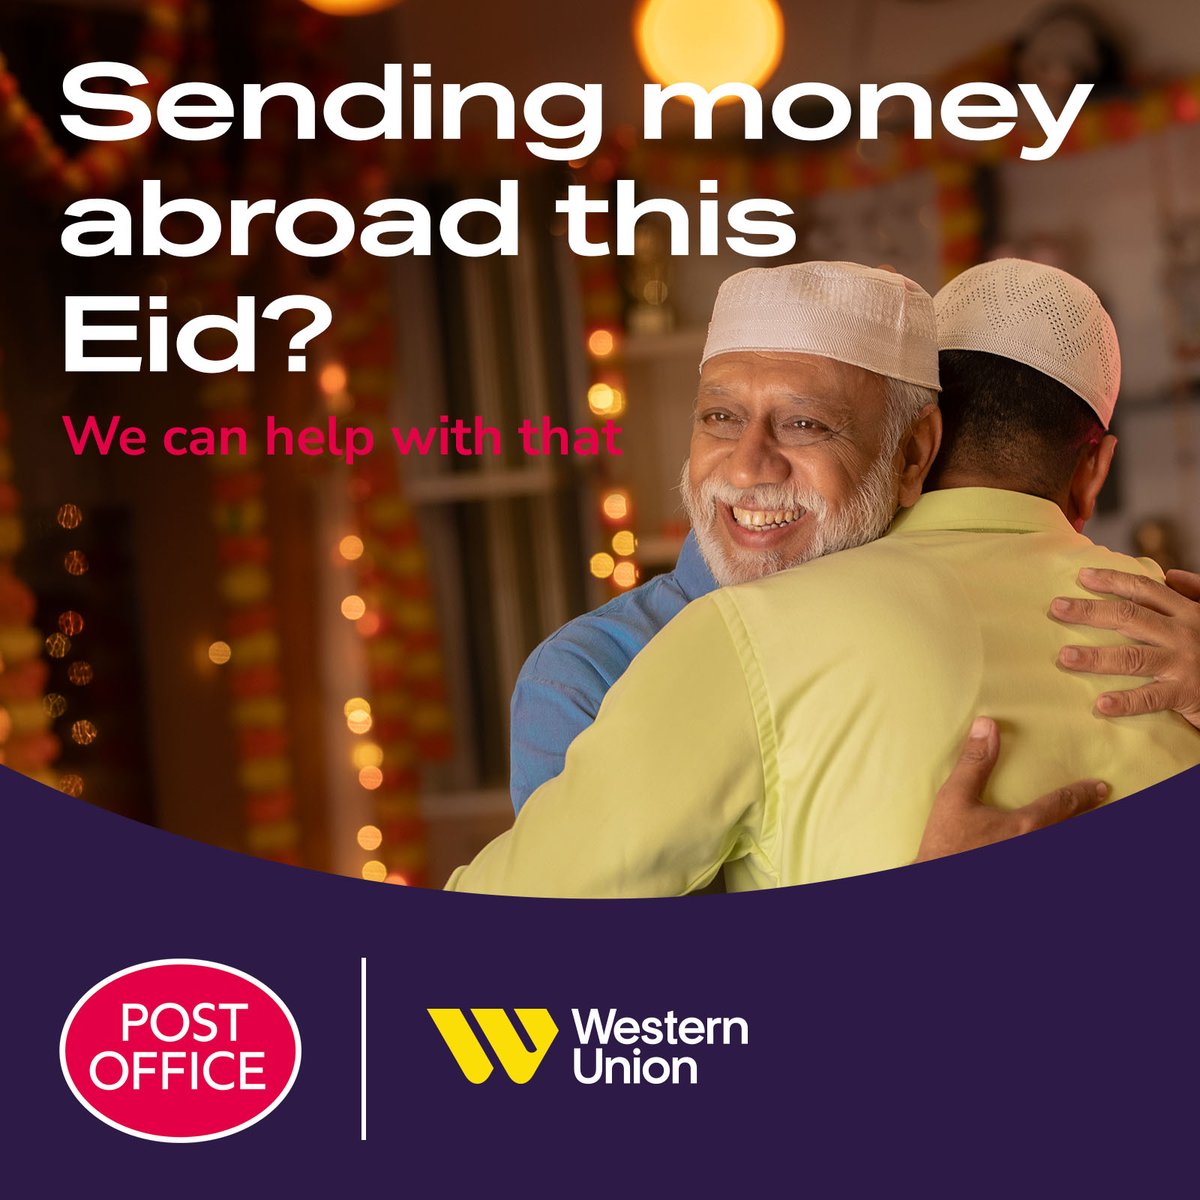 Send money abroad for Eid in no time with Western Union at Boscombe East 💸💷​

#MoneyTransfer #WeCanHelpWithThat #Eid